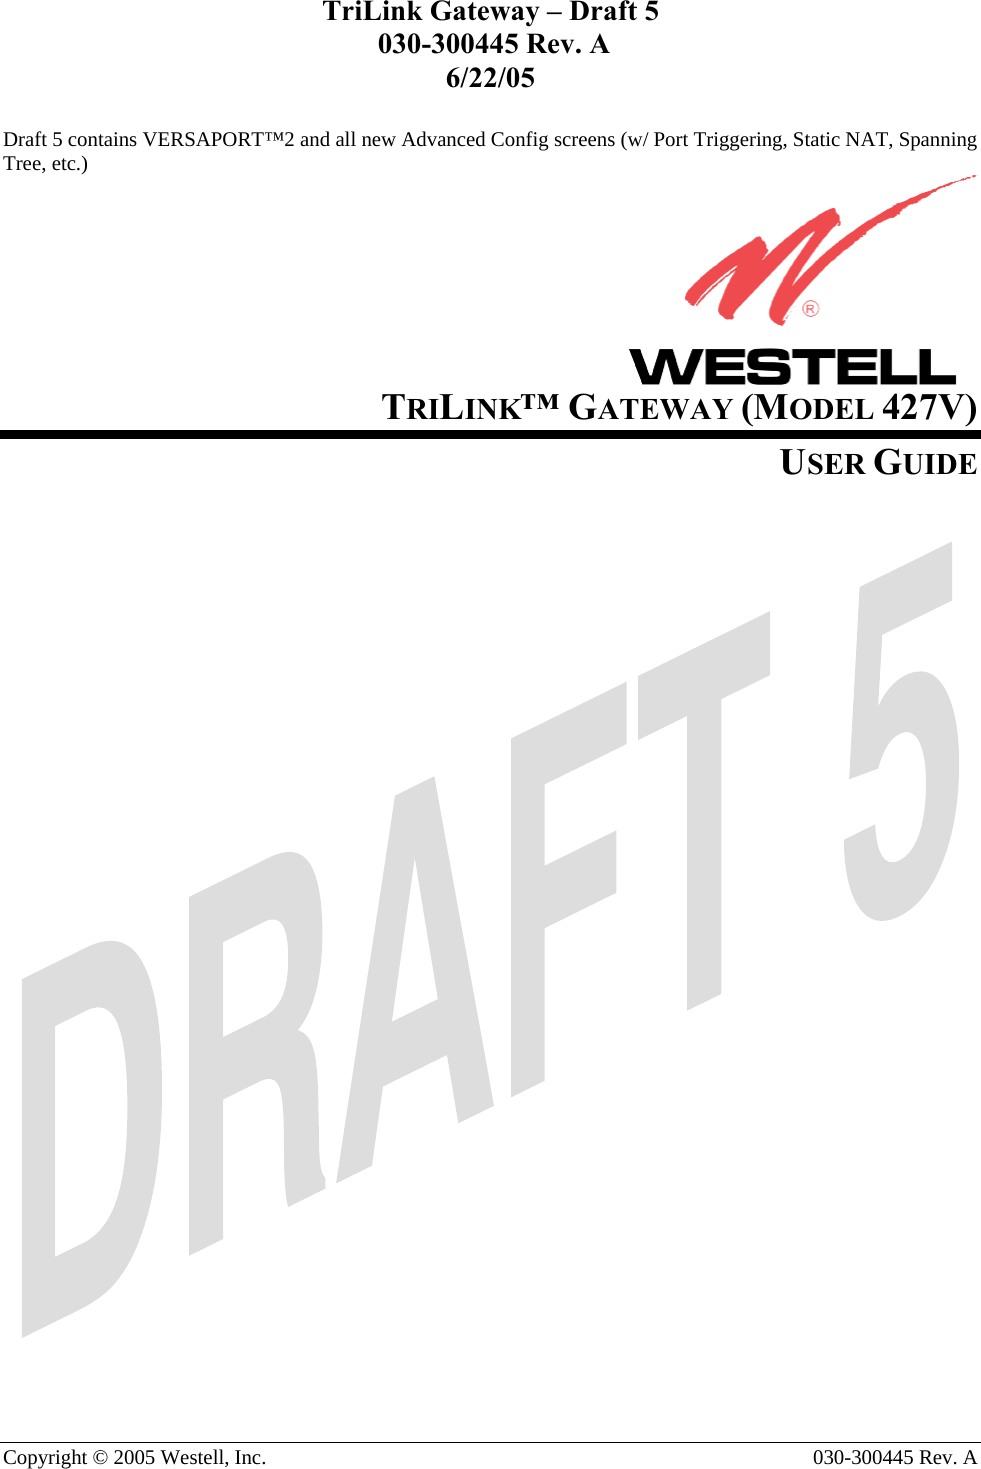 TriLink Gateway – Draft 5  030-300445 Rev. A 6/22/05  Copyright © 2005 Westell, Inc.   030-300445 Rev. A                Draft 5 contains VERSAPORT™2 and all new Advanced Config screens (w/ Port Triggering, Static NAT, Spanning Tree, etc.)      TRILINK™ GATEWAY (MODEL 427V) USER GUIDE                                   